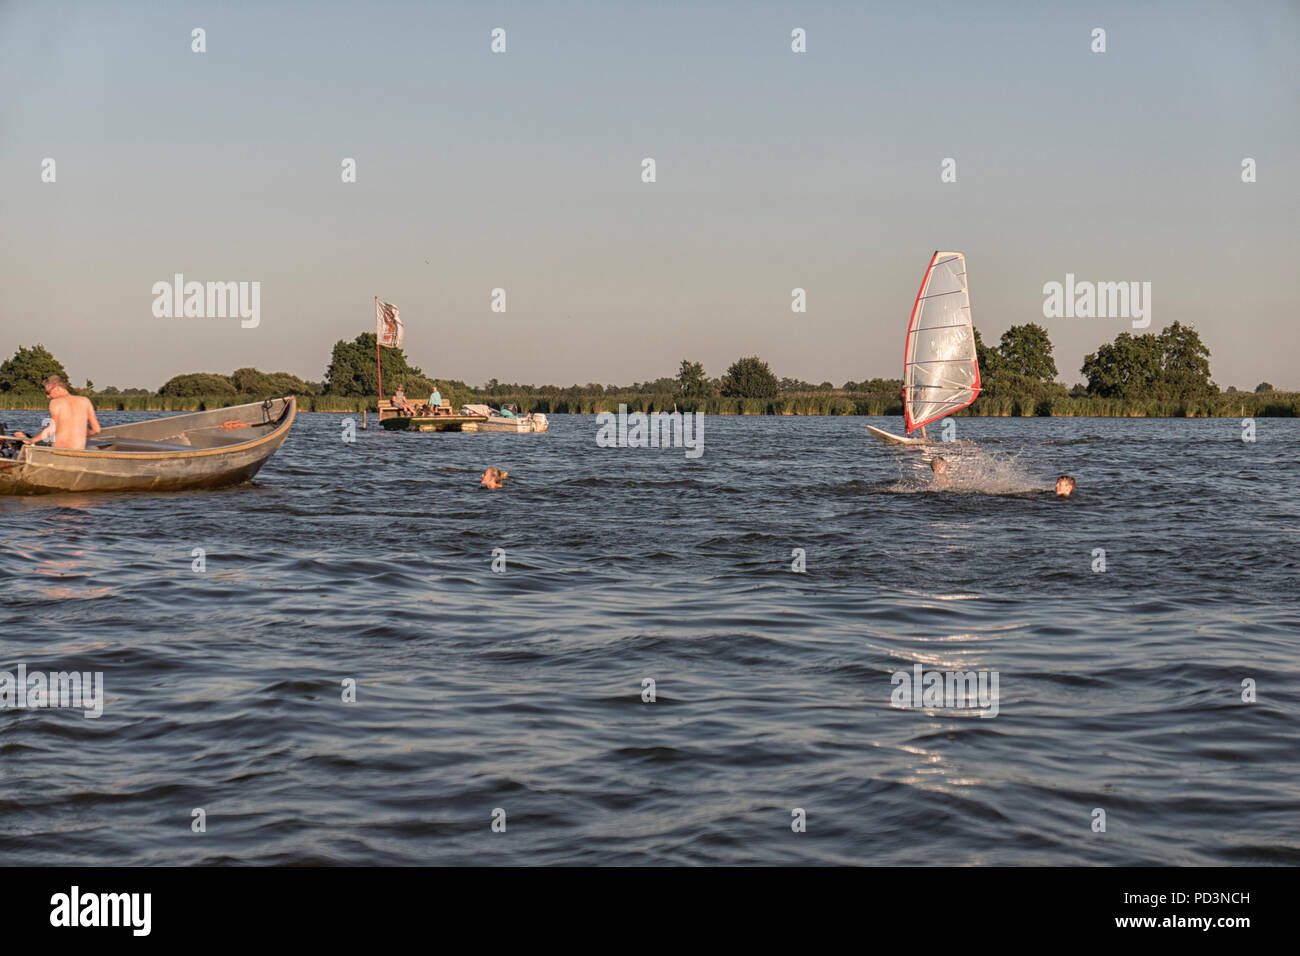 Fun in the water of the Leekstermeer in Groningen, The Netherlands during the heatwave of 2018 Stock Photo